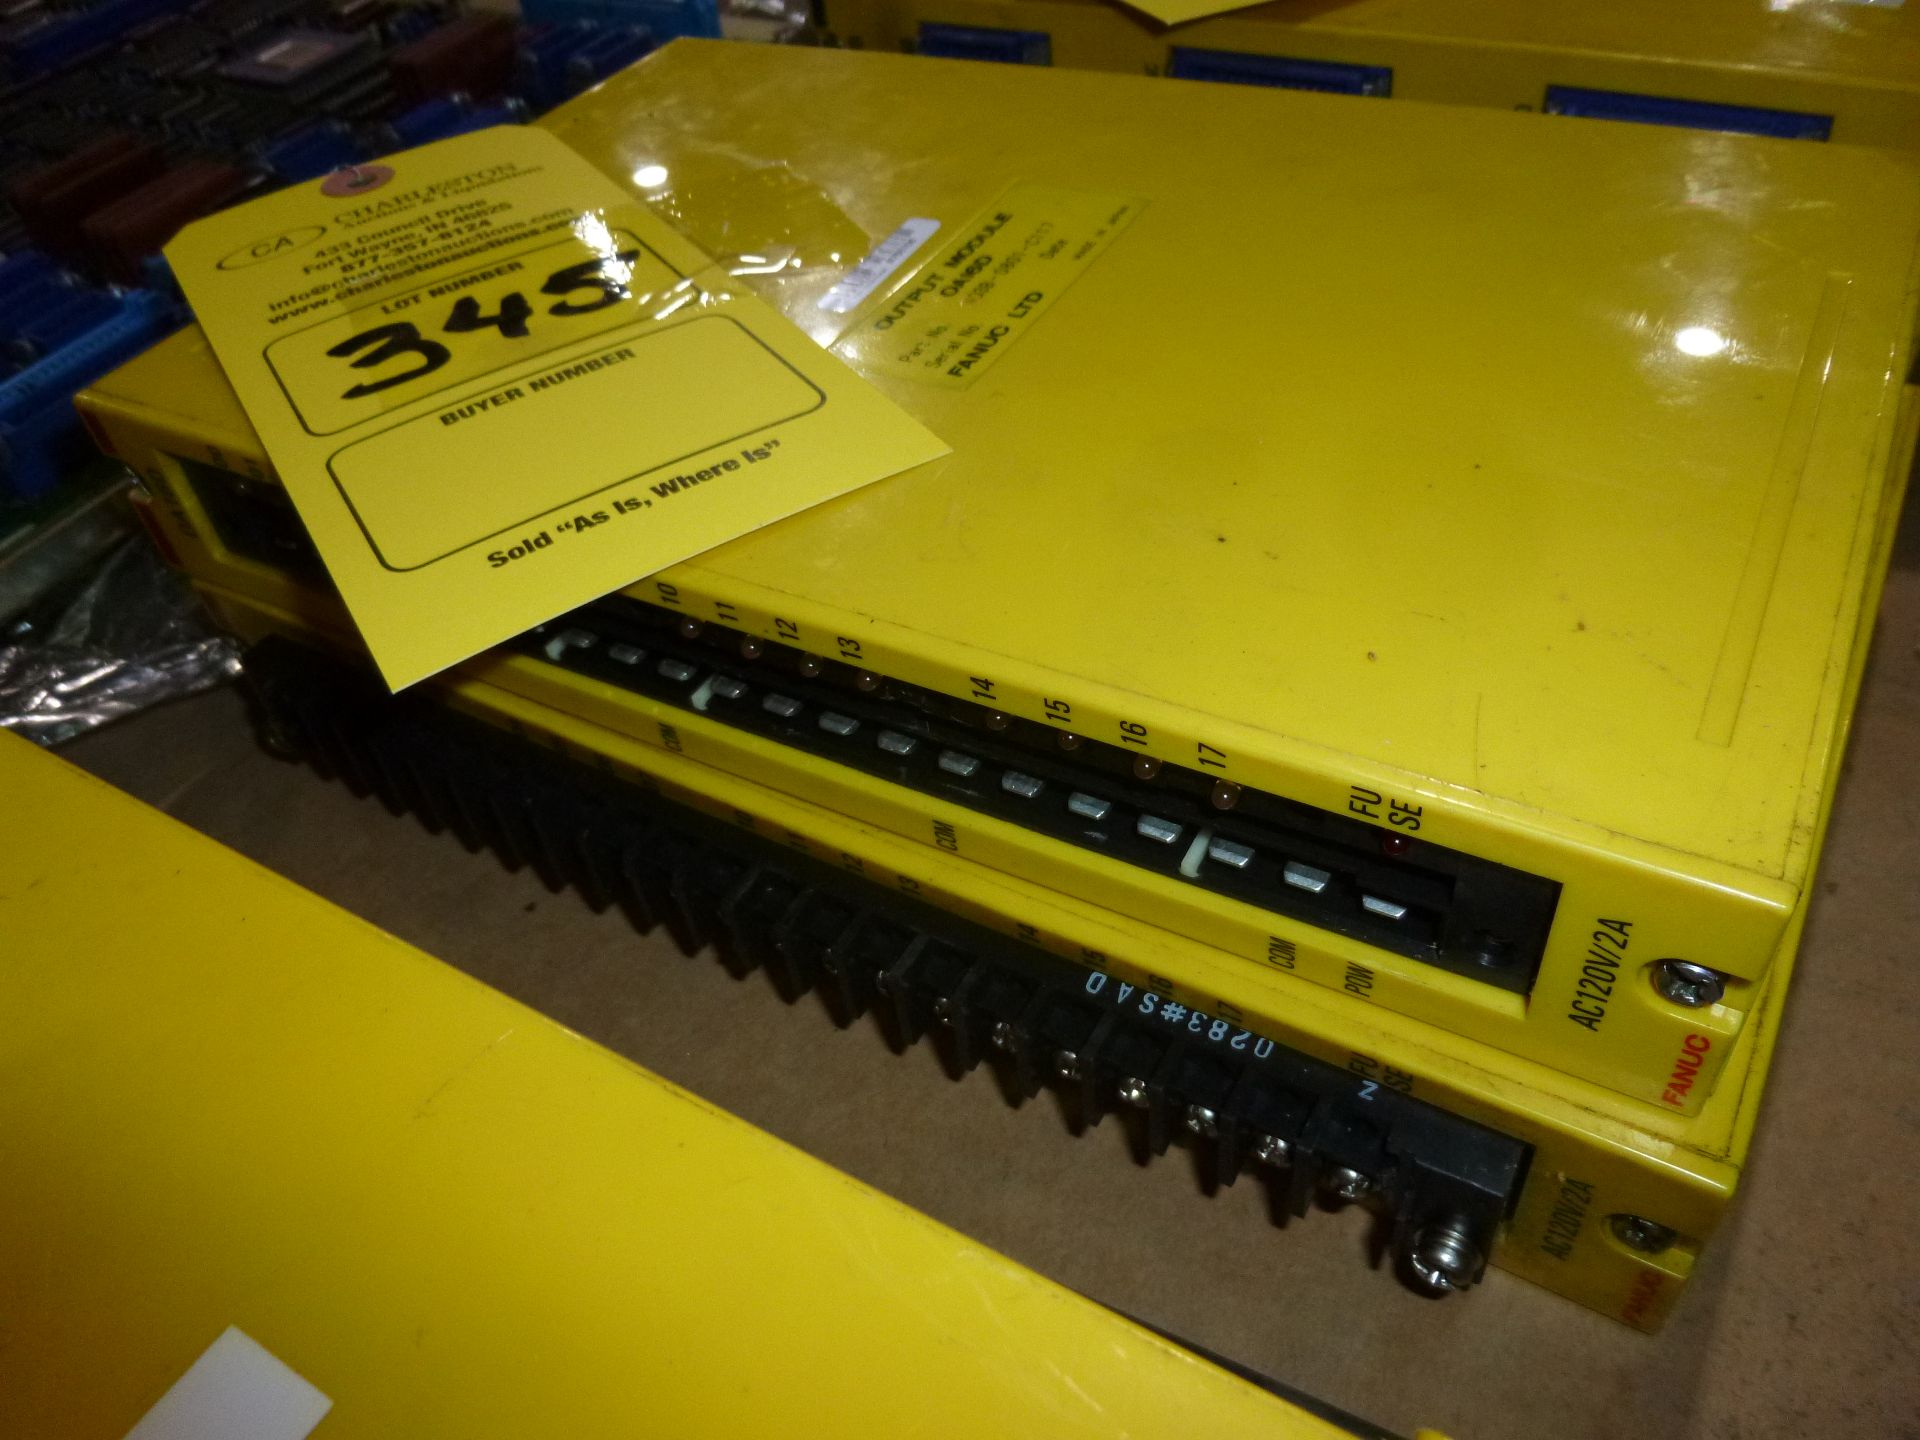 Qty 2 Fanuc output module model A03B-0801-C115, as always with Brolyn LLC auctions, all lots can - Image 2 of 3